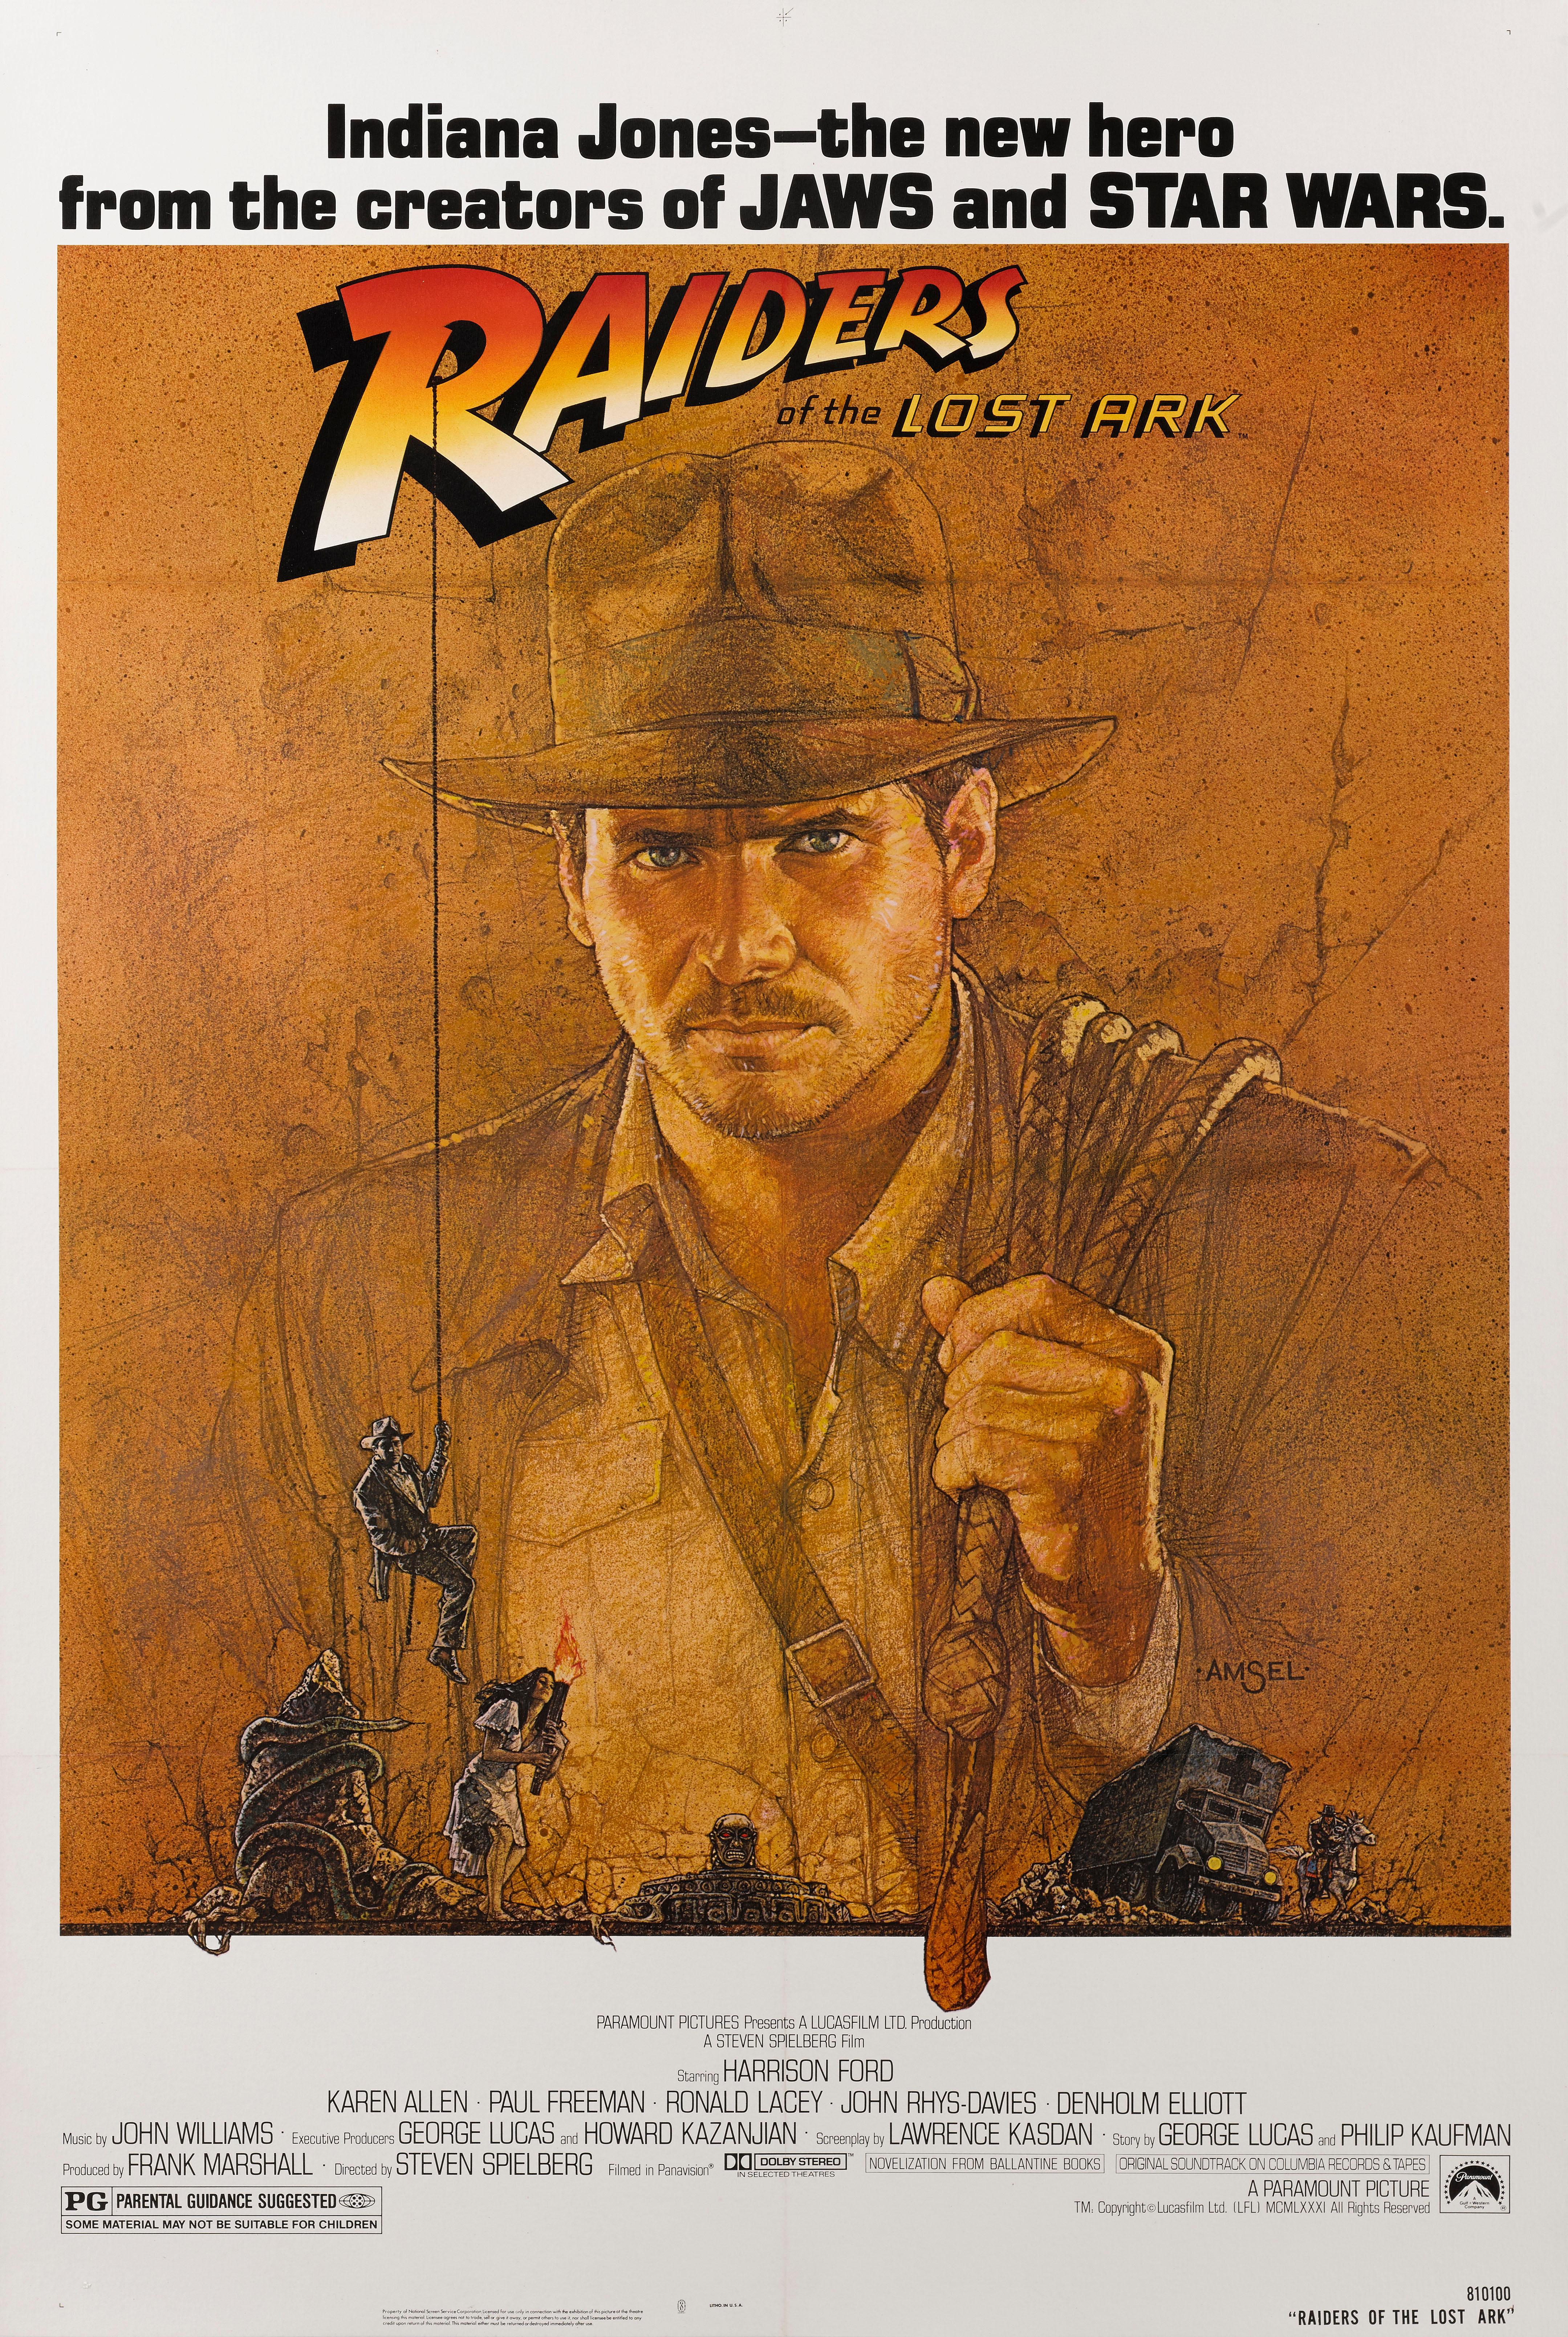 Original American movie poster for Steven Spielberg's 1981 blockbuster adventure film starring Harrison Ford. The artwork is by Richard Amsel (1947-1985).
This poster is conservation linen backed and would be sent out rolled in a strong tube.